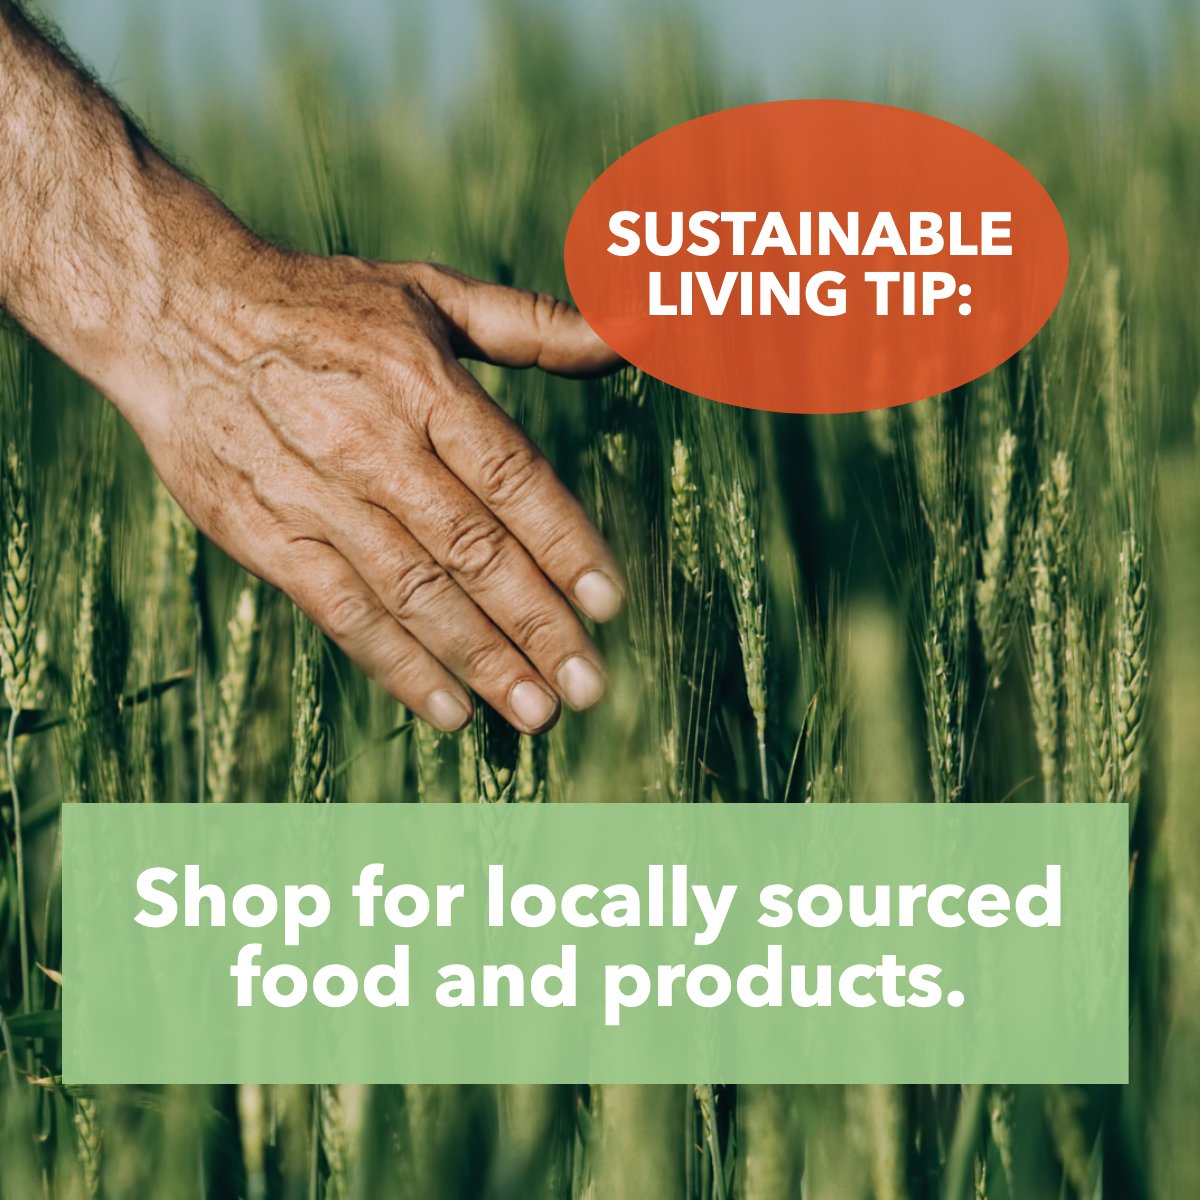 Help your local market! 💪 You will probably be able to get organic products and it will help you become more healthy with your food! 🍅

#sustainablelifestyle    #sustainable    #sustainablity    #sustainablefood
#realestate #franciskrebsrealtor #googlefranciskrebs